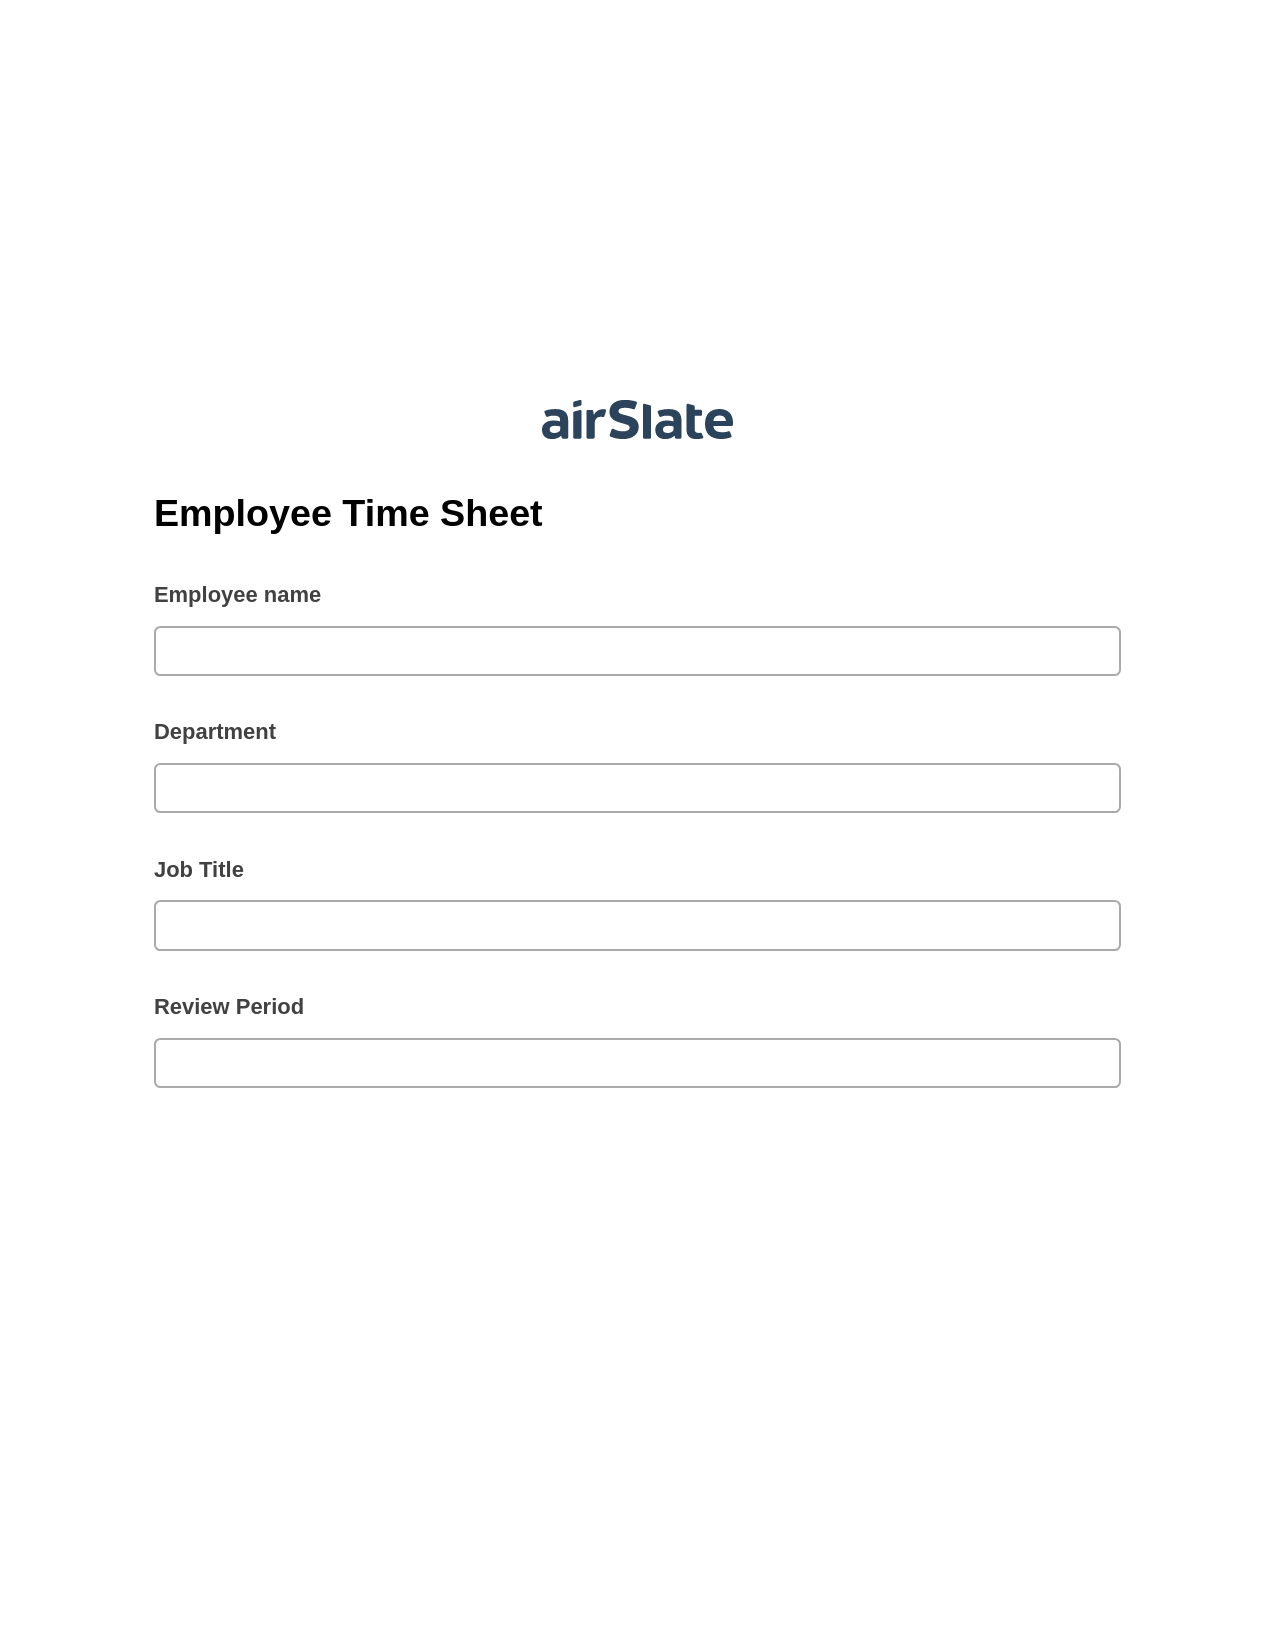 Multirole Employee Time Sheet Pre-fill from Smartsheet Bot, Create slate addon, Export to Excel 365 Bot